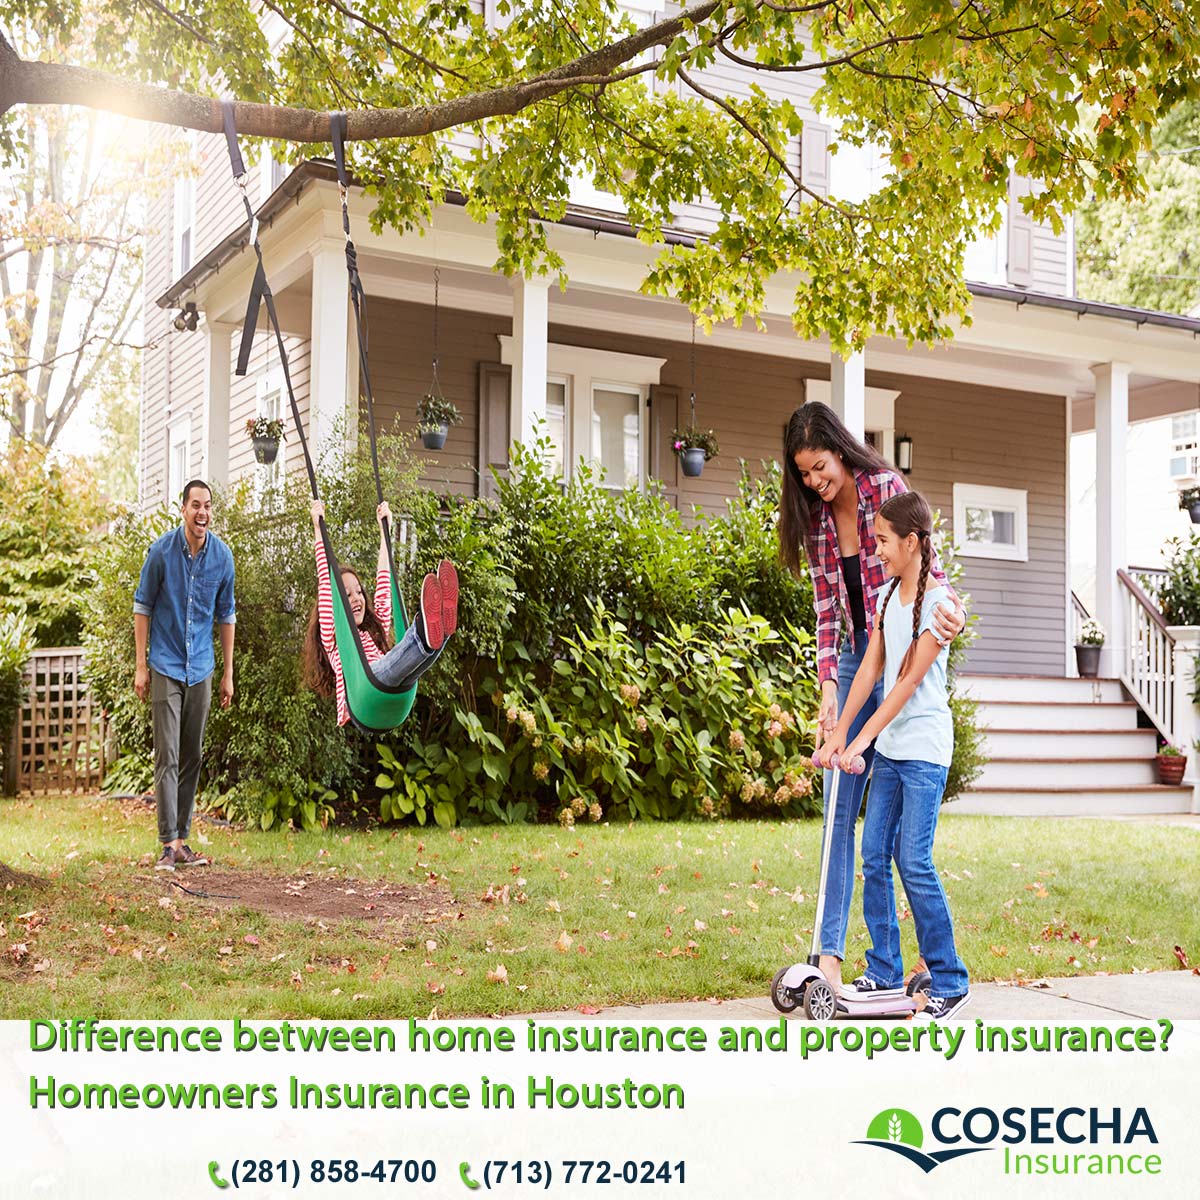 31 Homeowners Insurance in Houston